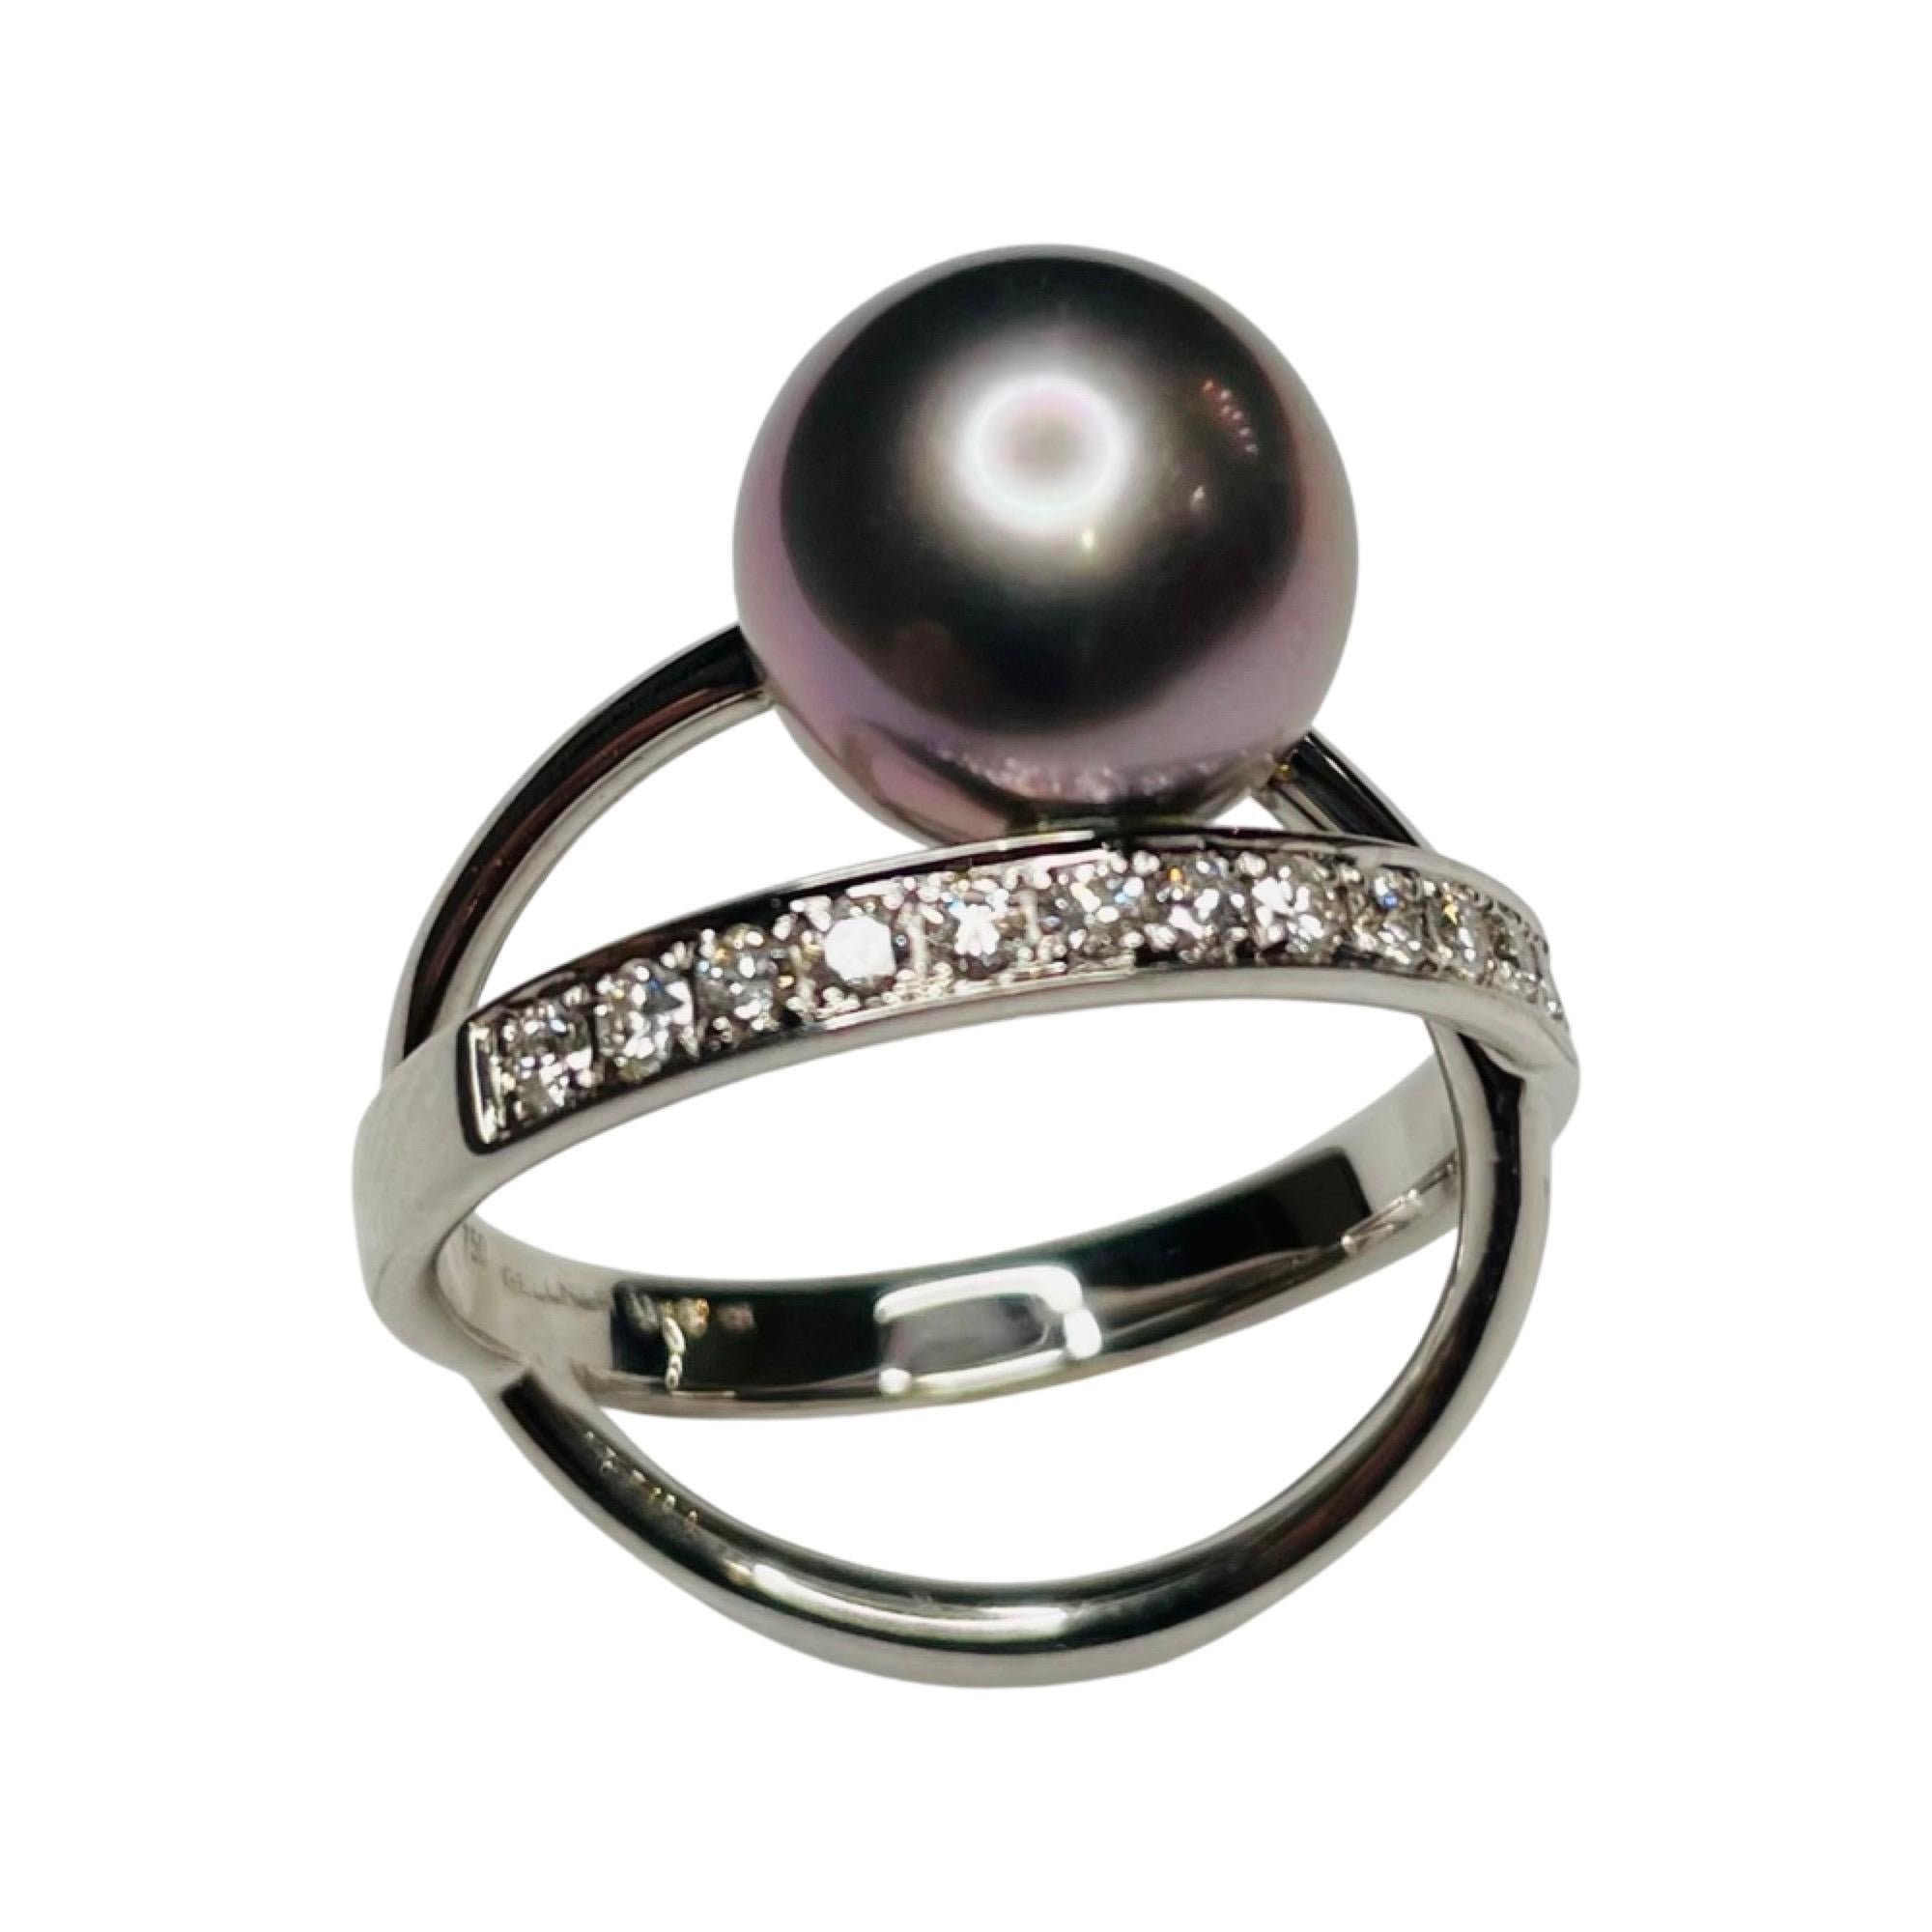 Gellner 18K White Gold Tahitian Black Pearl and Diamond Ring. The black, natural color, cultured Tahitian pearl is 11.00 mm. The pearl is a whole pearl with slight spotting and high luster. It has a rose poe rava overtone. There are 16 full cut